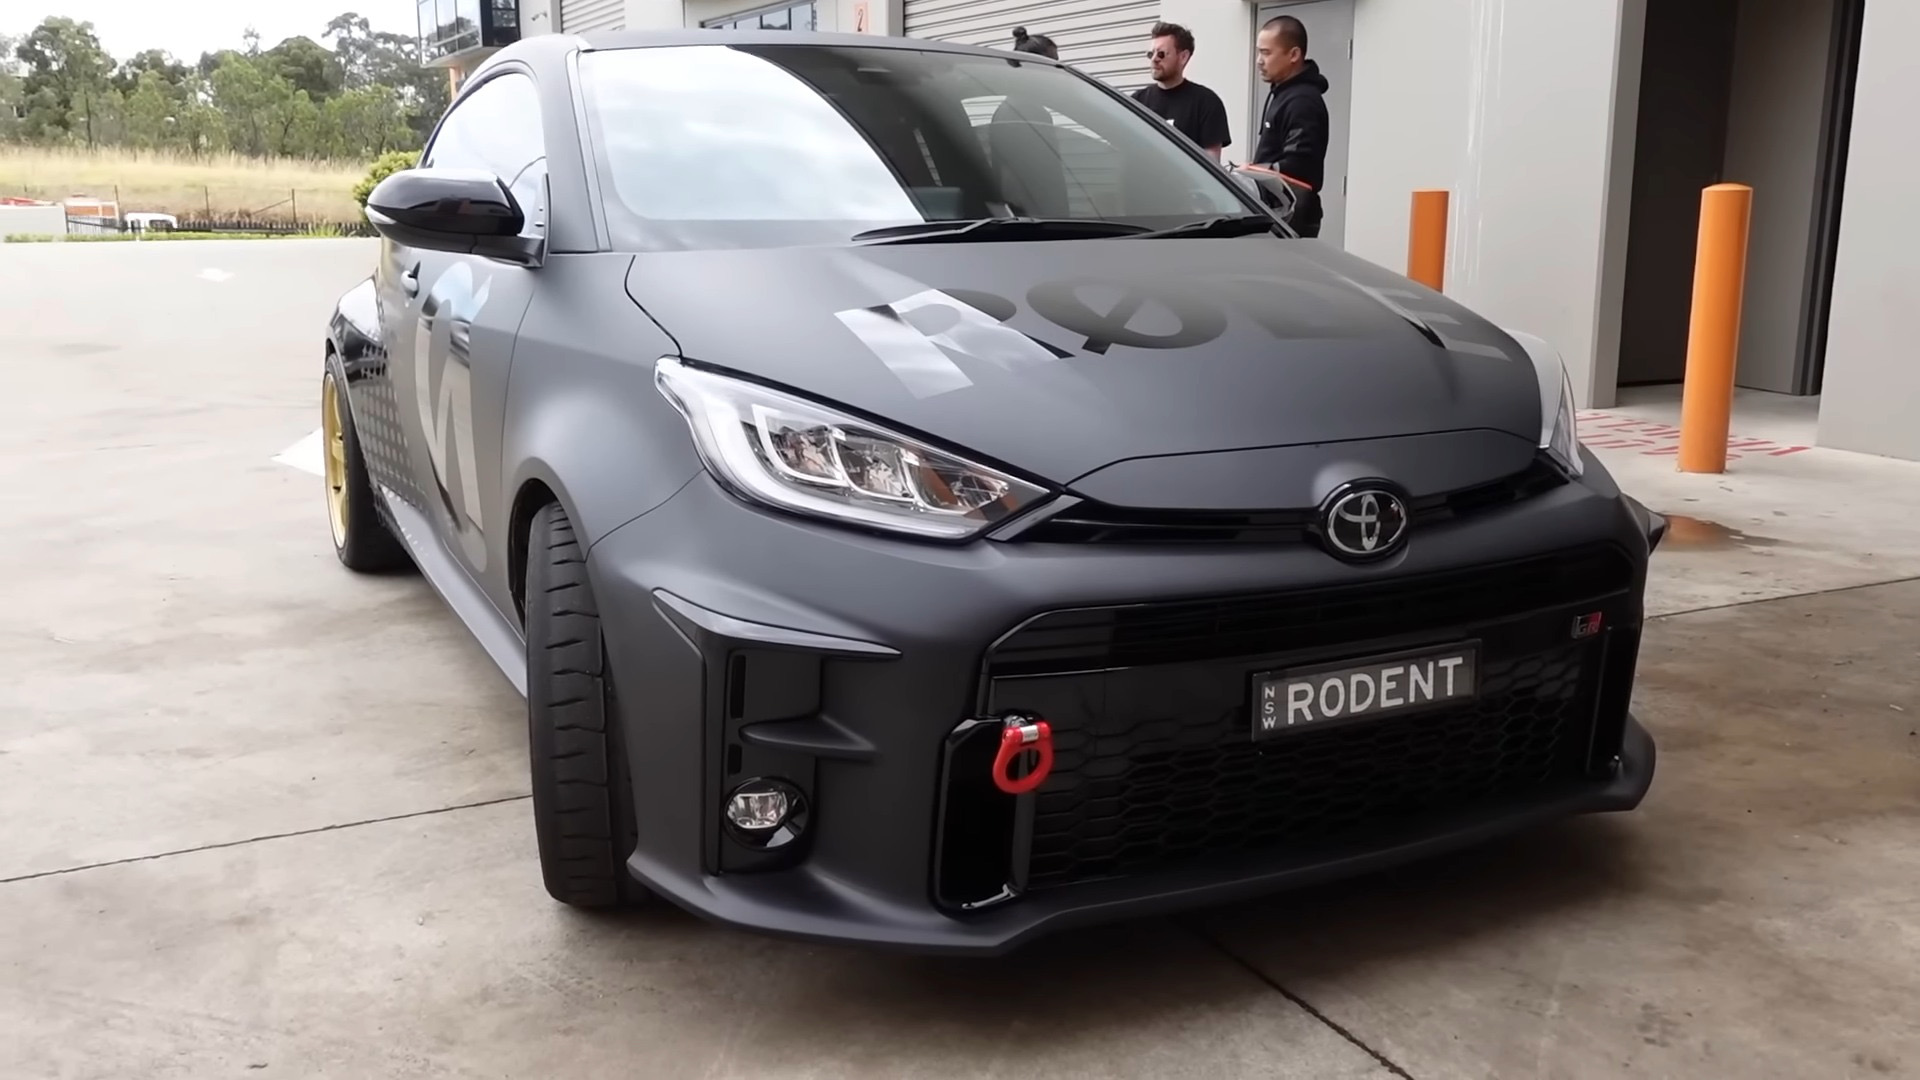 Aussie tuners extract 545kW from GR Yaris 1.6-litre turbo 3CYL